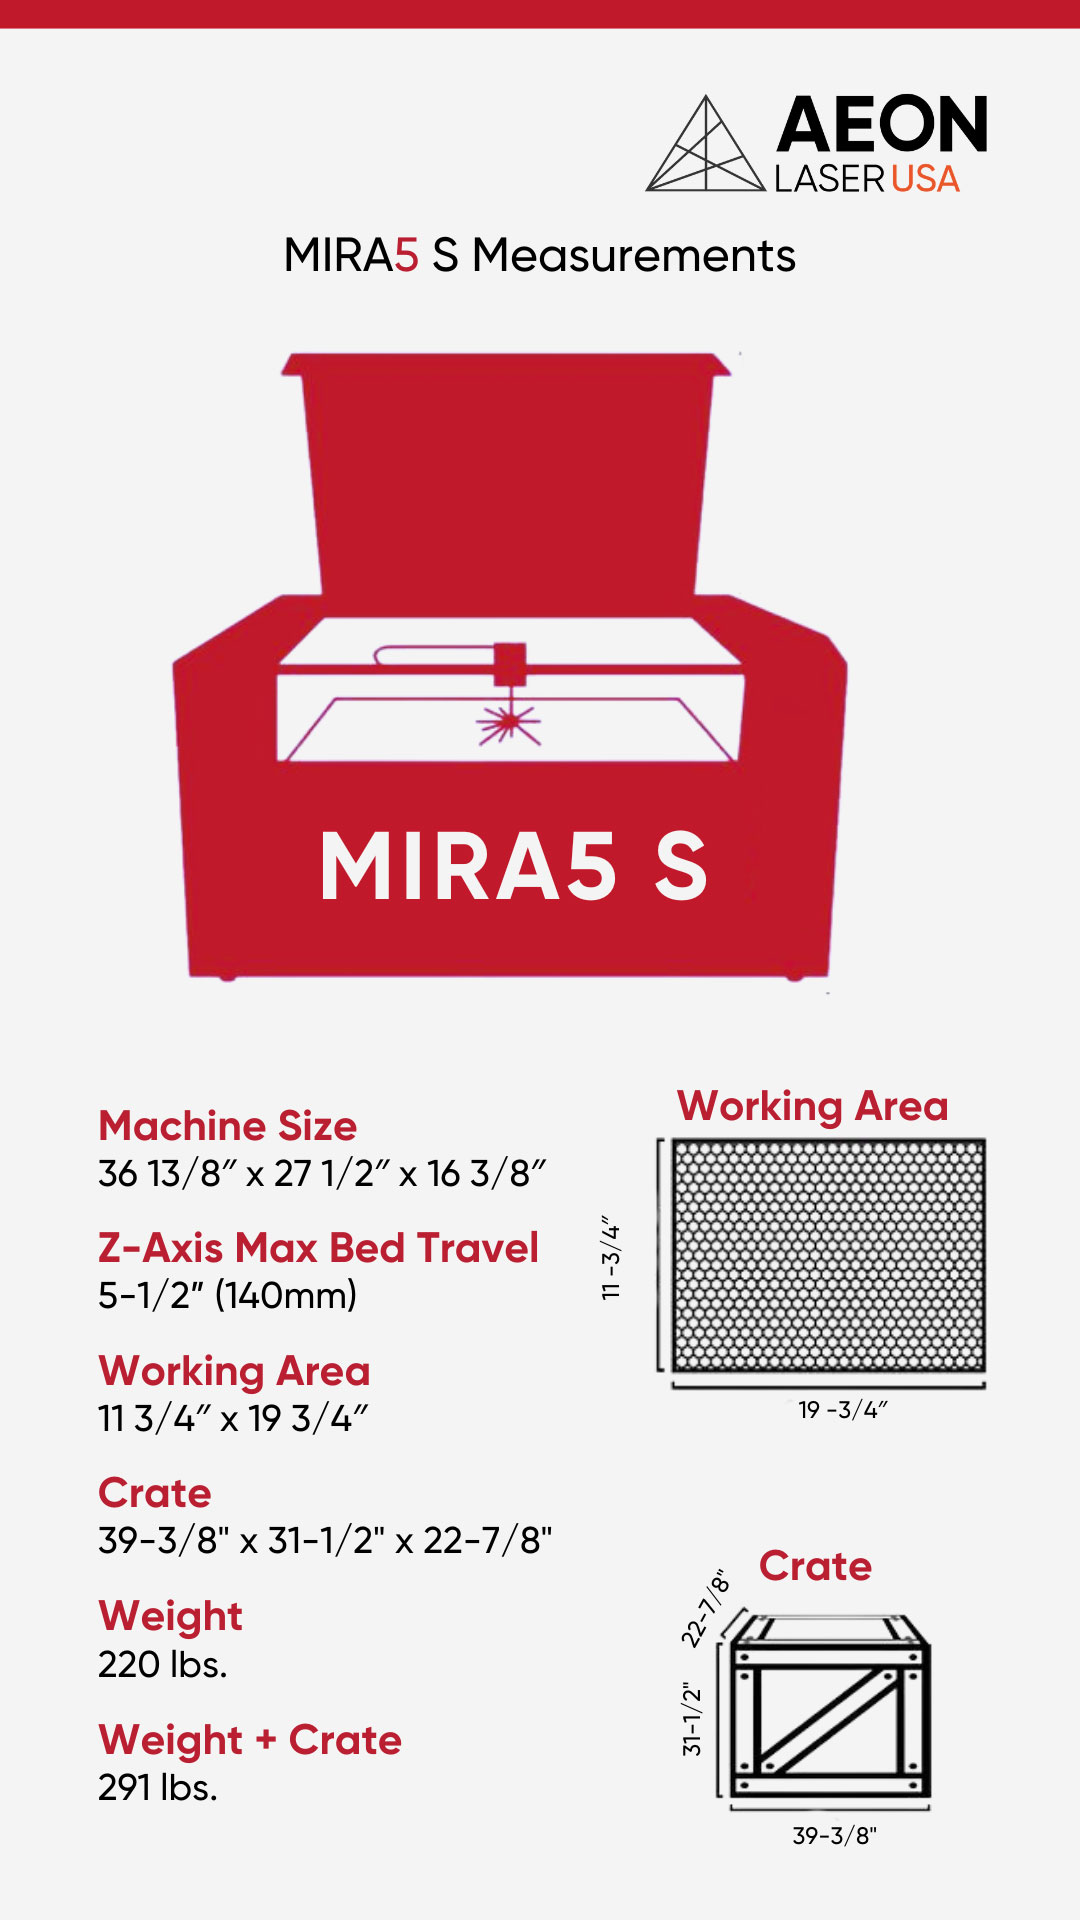 Graphic showing the dimensions of the MIRA 5 S laser, crate size, and weight info